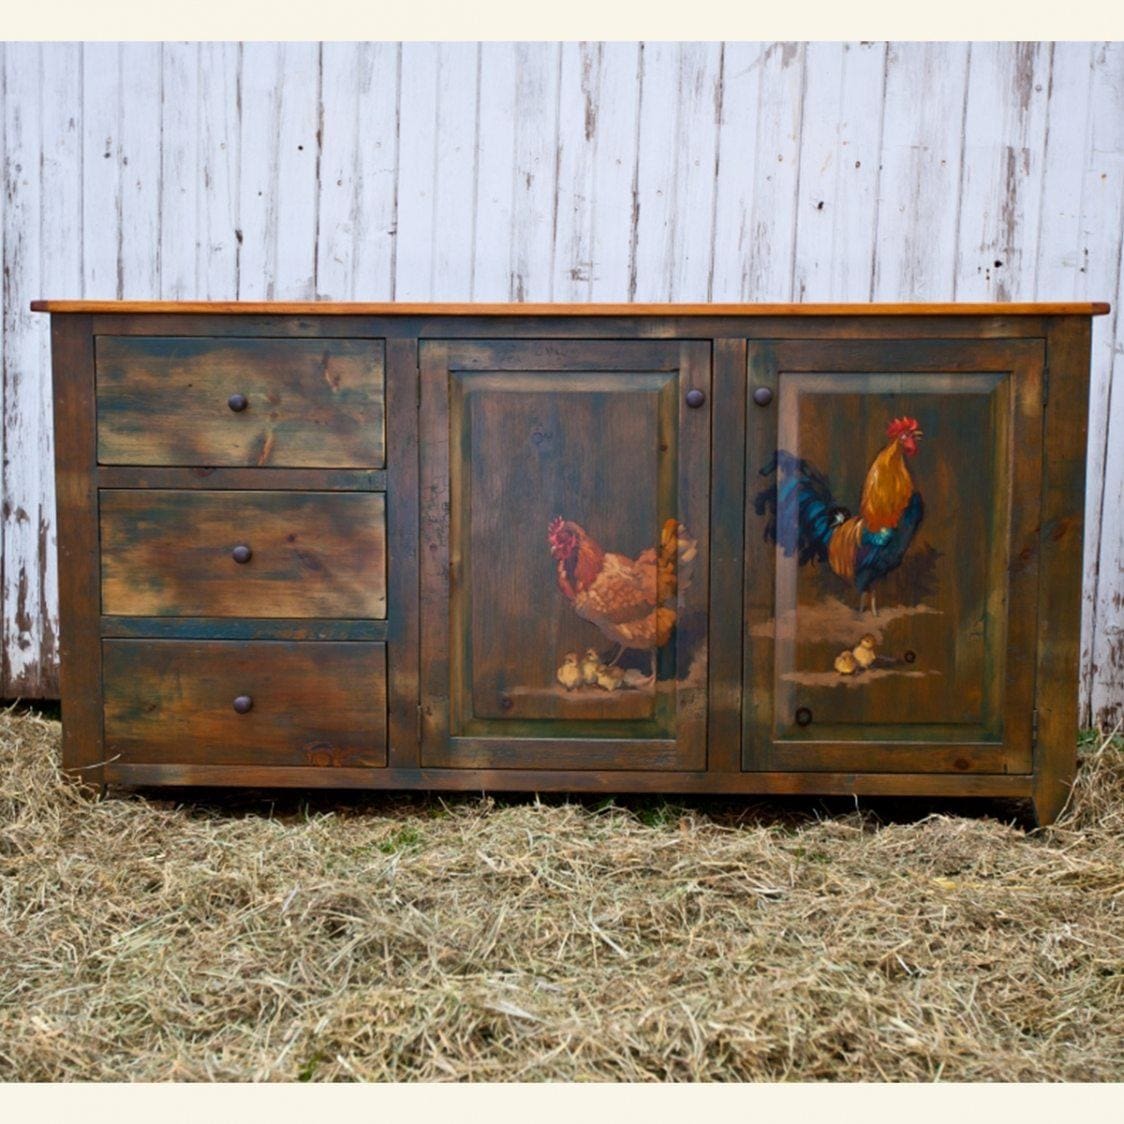 Furniture-from-the-Barn-32sq